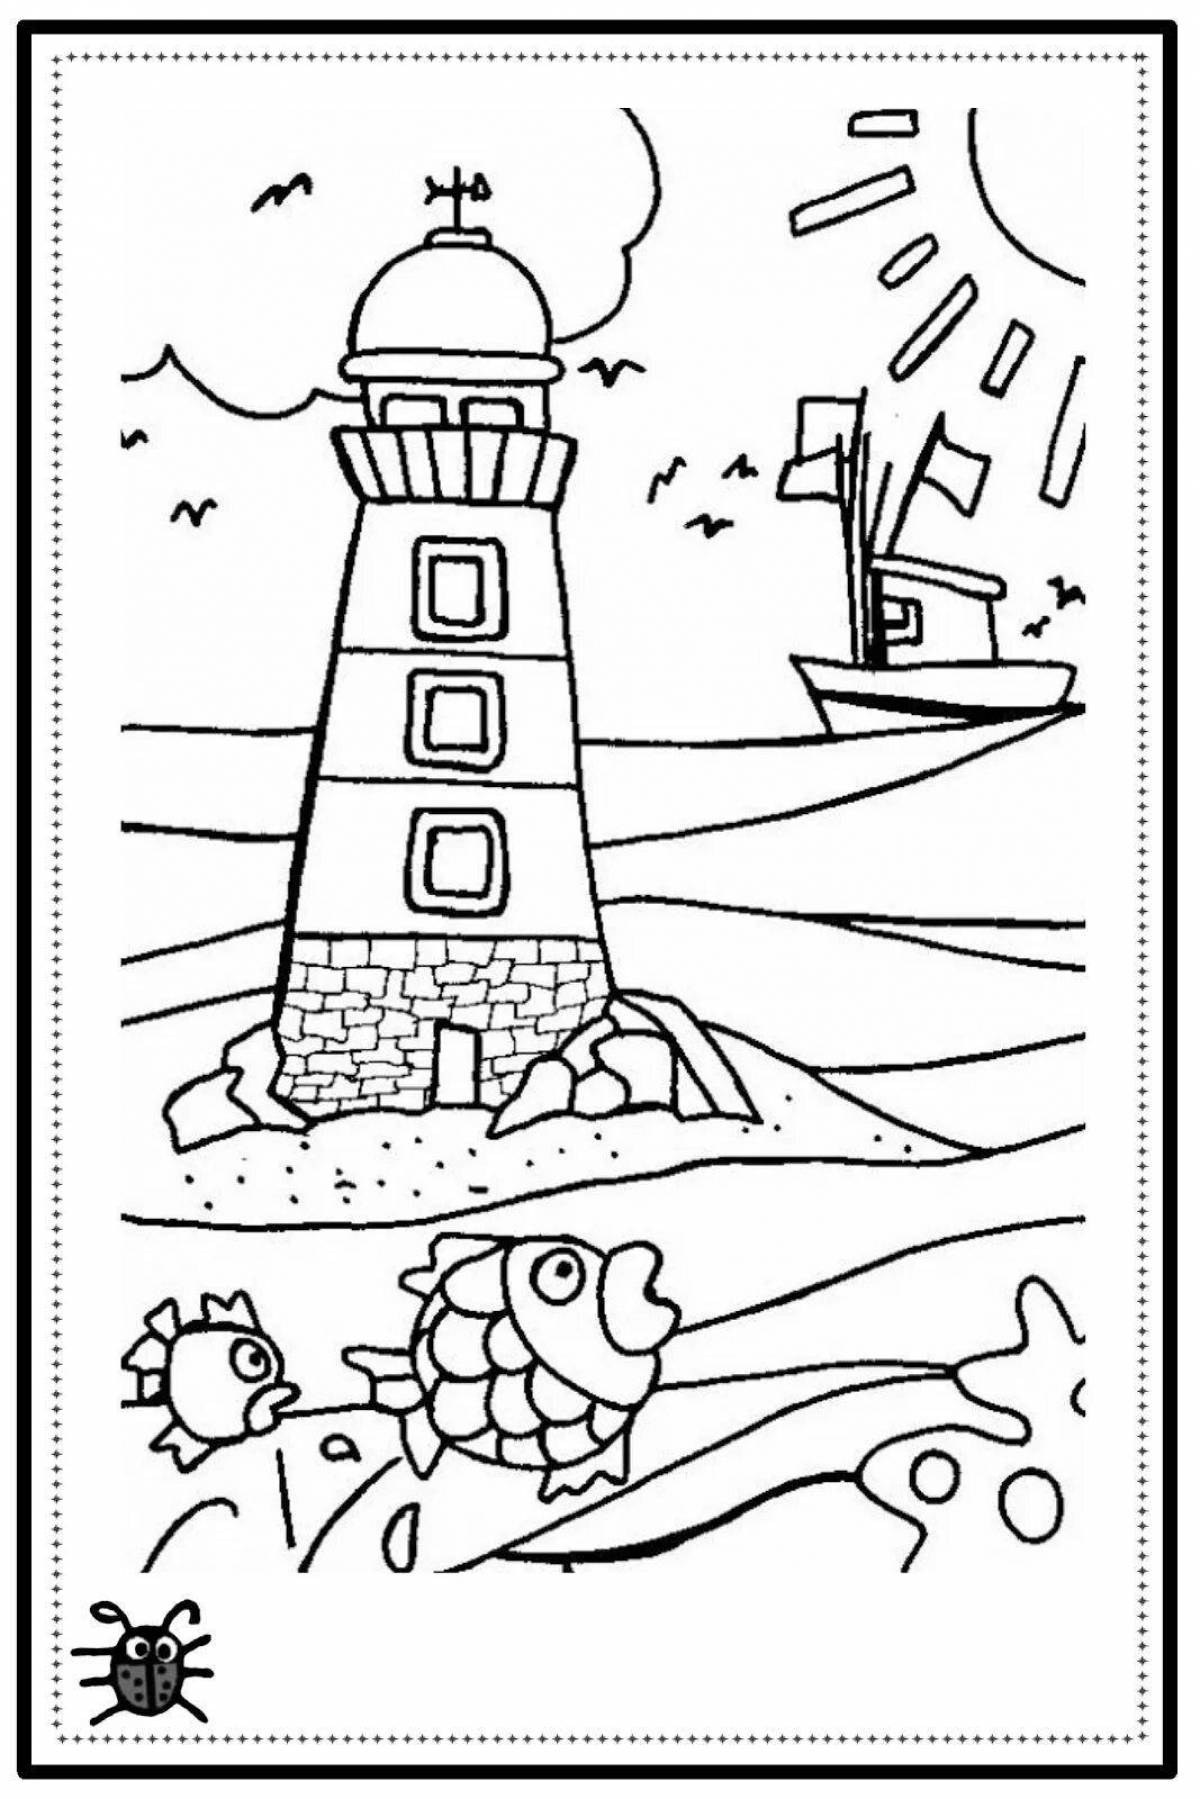 Dynamic lighthouse coloring book for kids